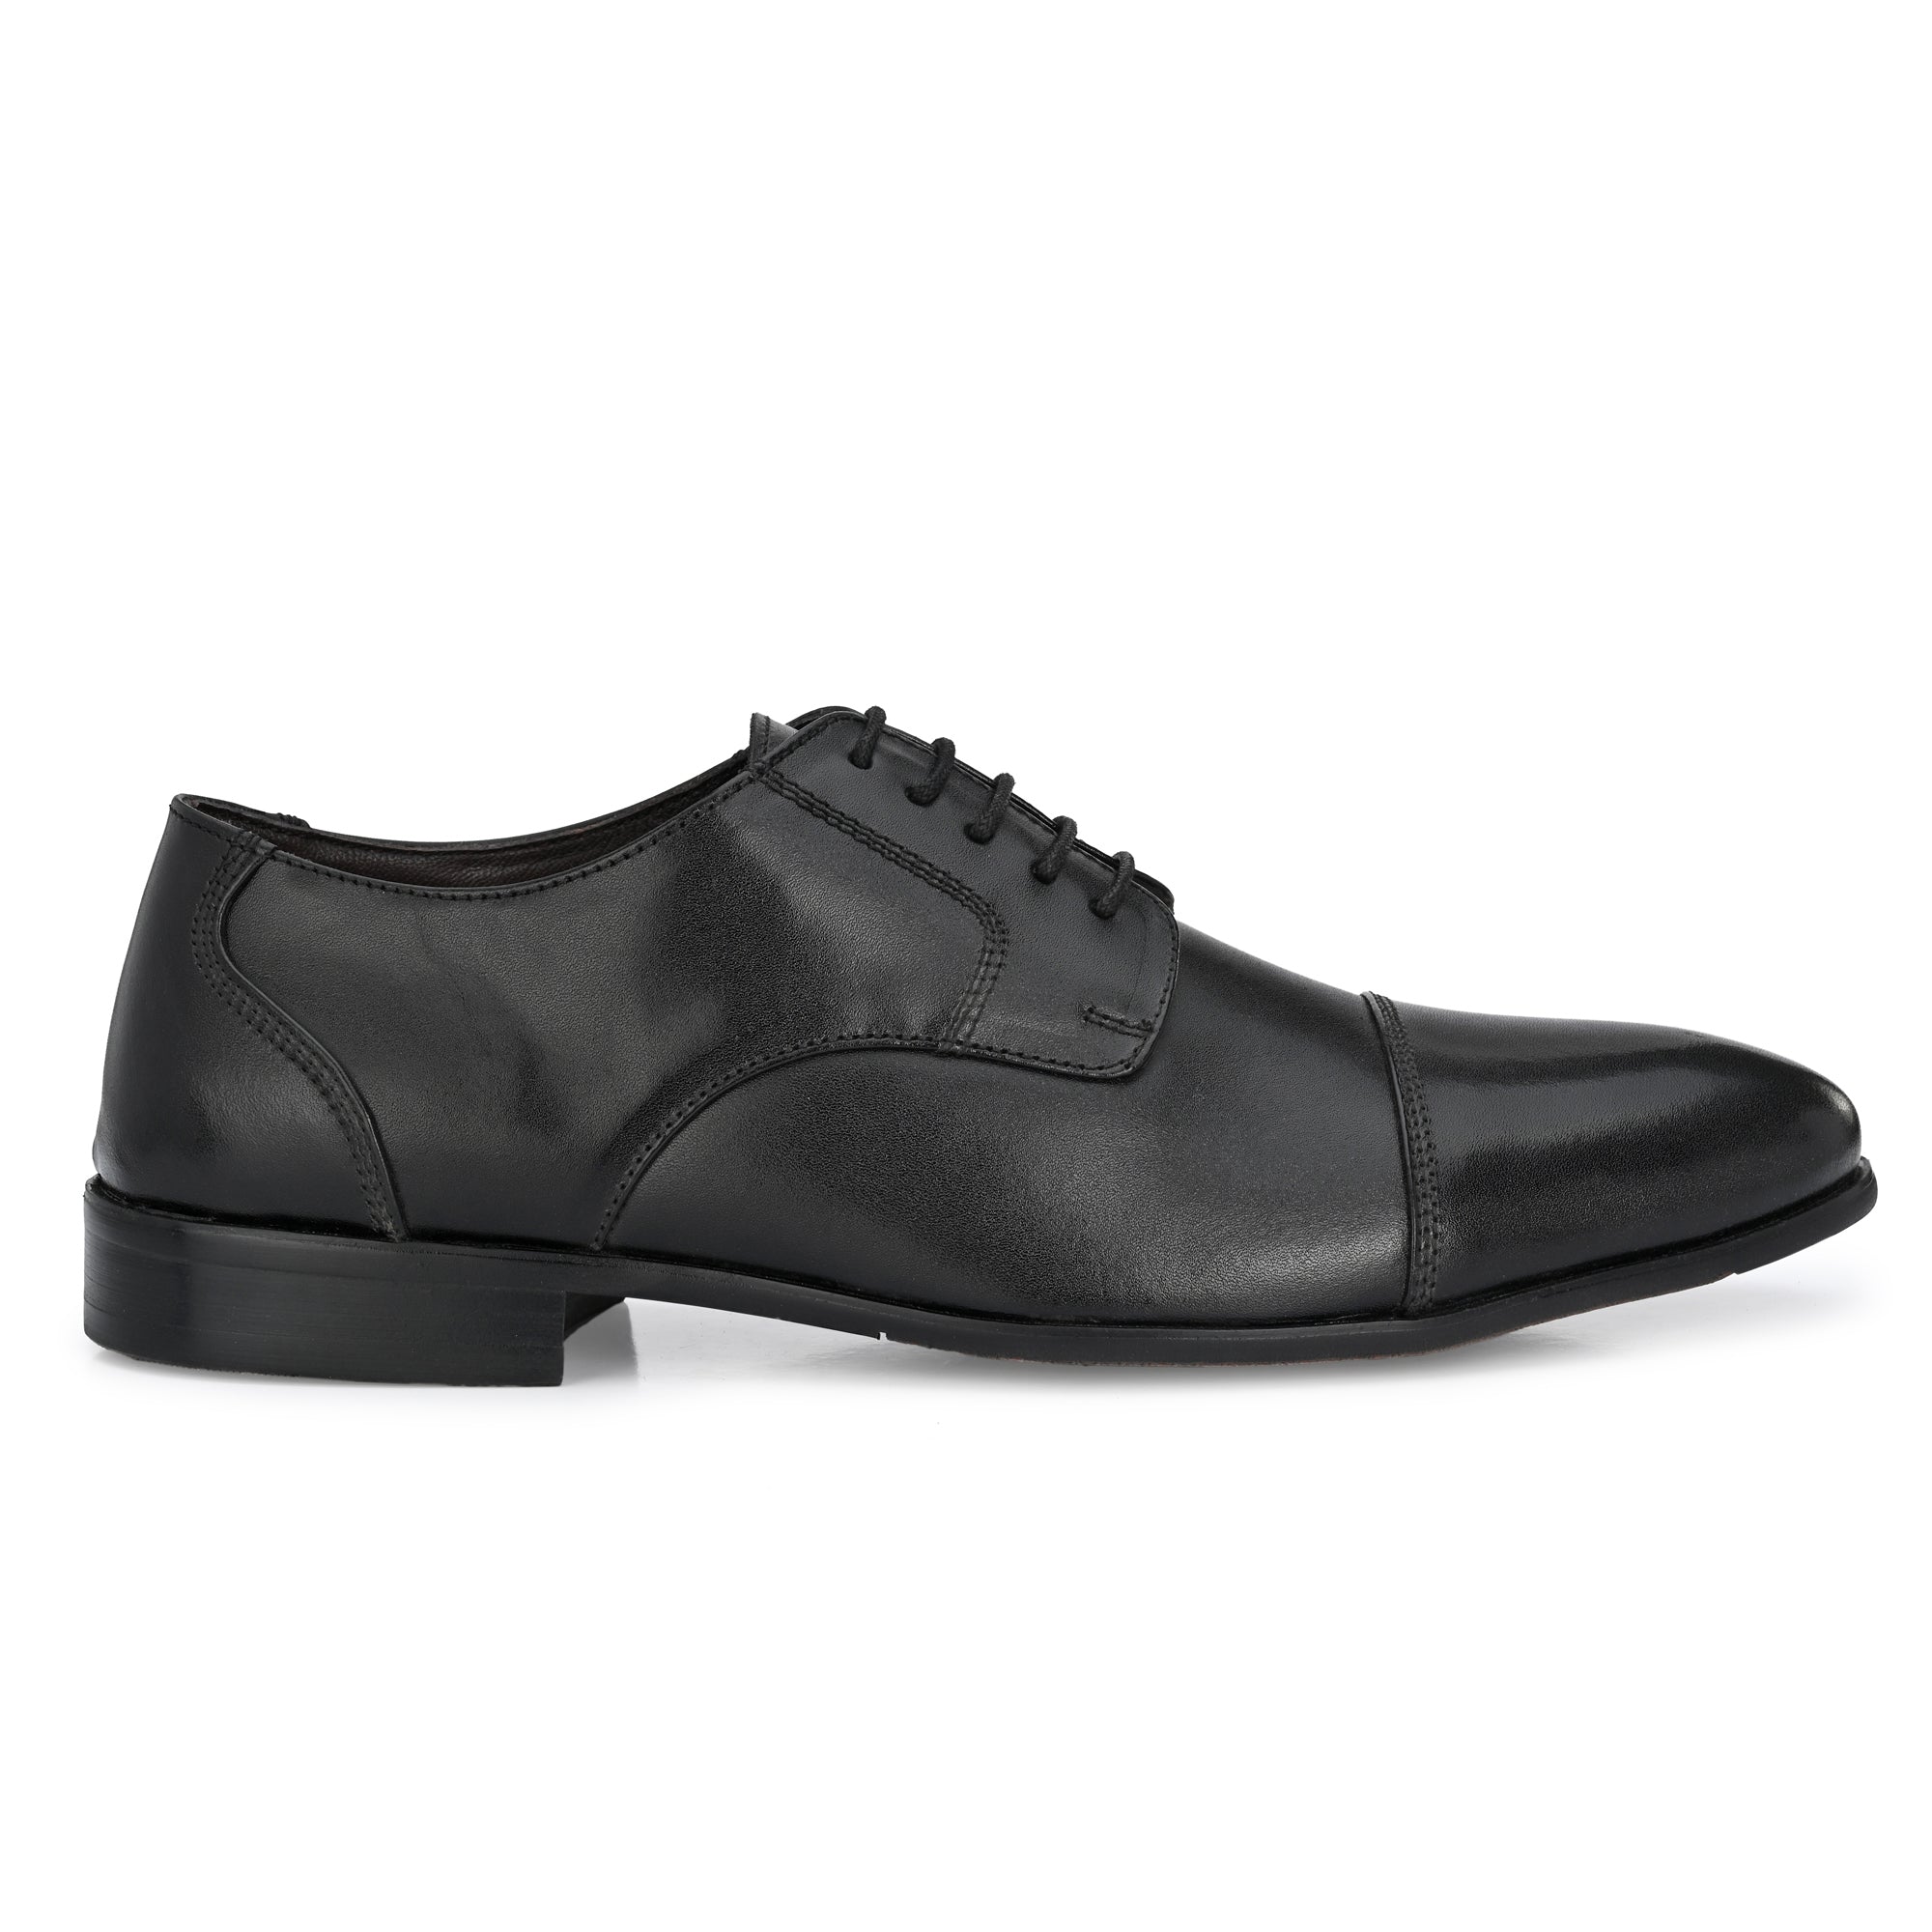 Egoss Premium Formal Leather Shoes for Men with laces